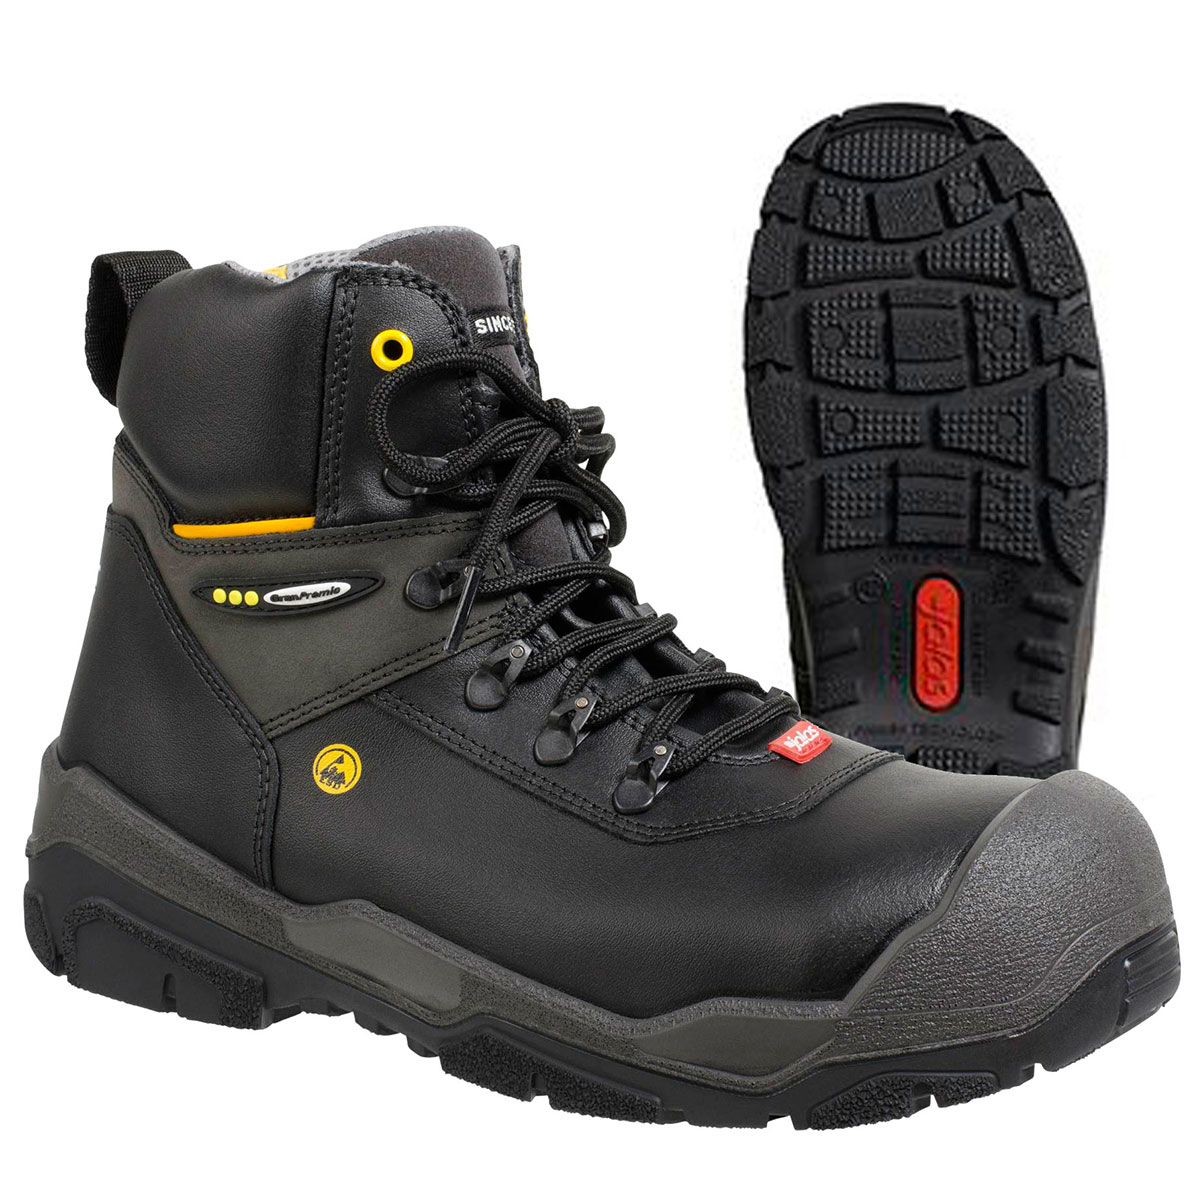 JALAS® 1828 by Ejendals: "JUPITER" - Light, Durable, Comfortable Heavy Duty S3 Work Boot